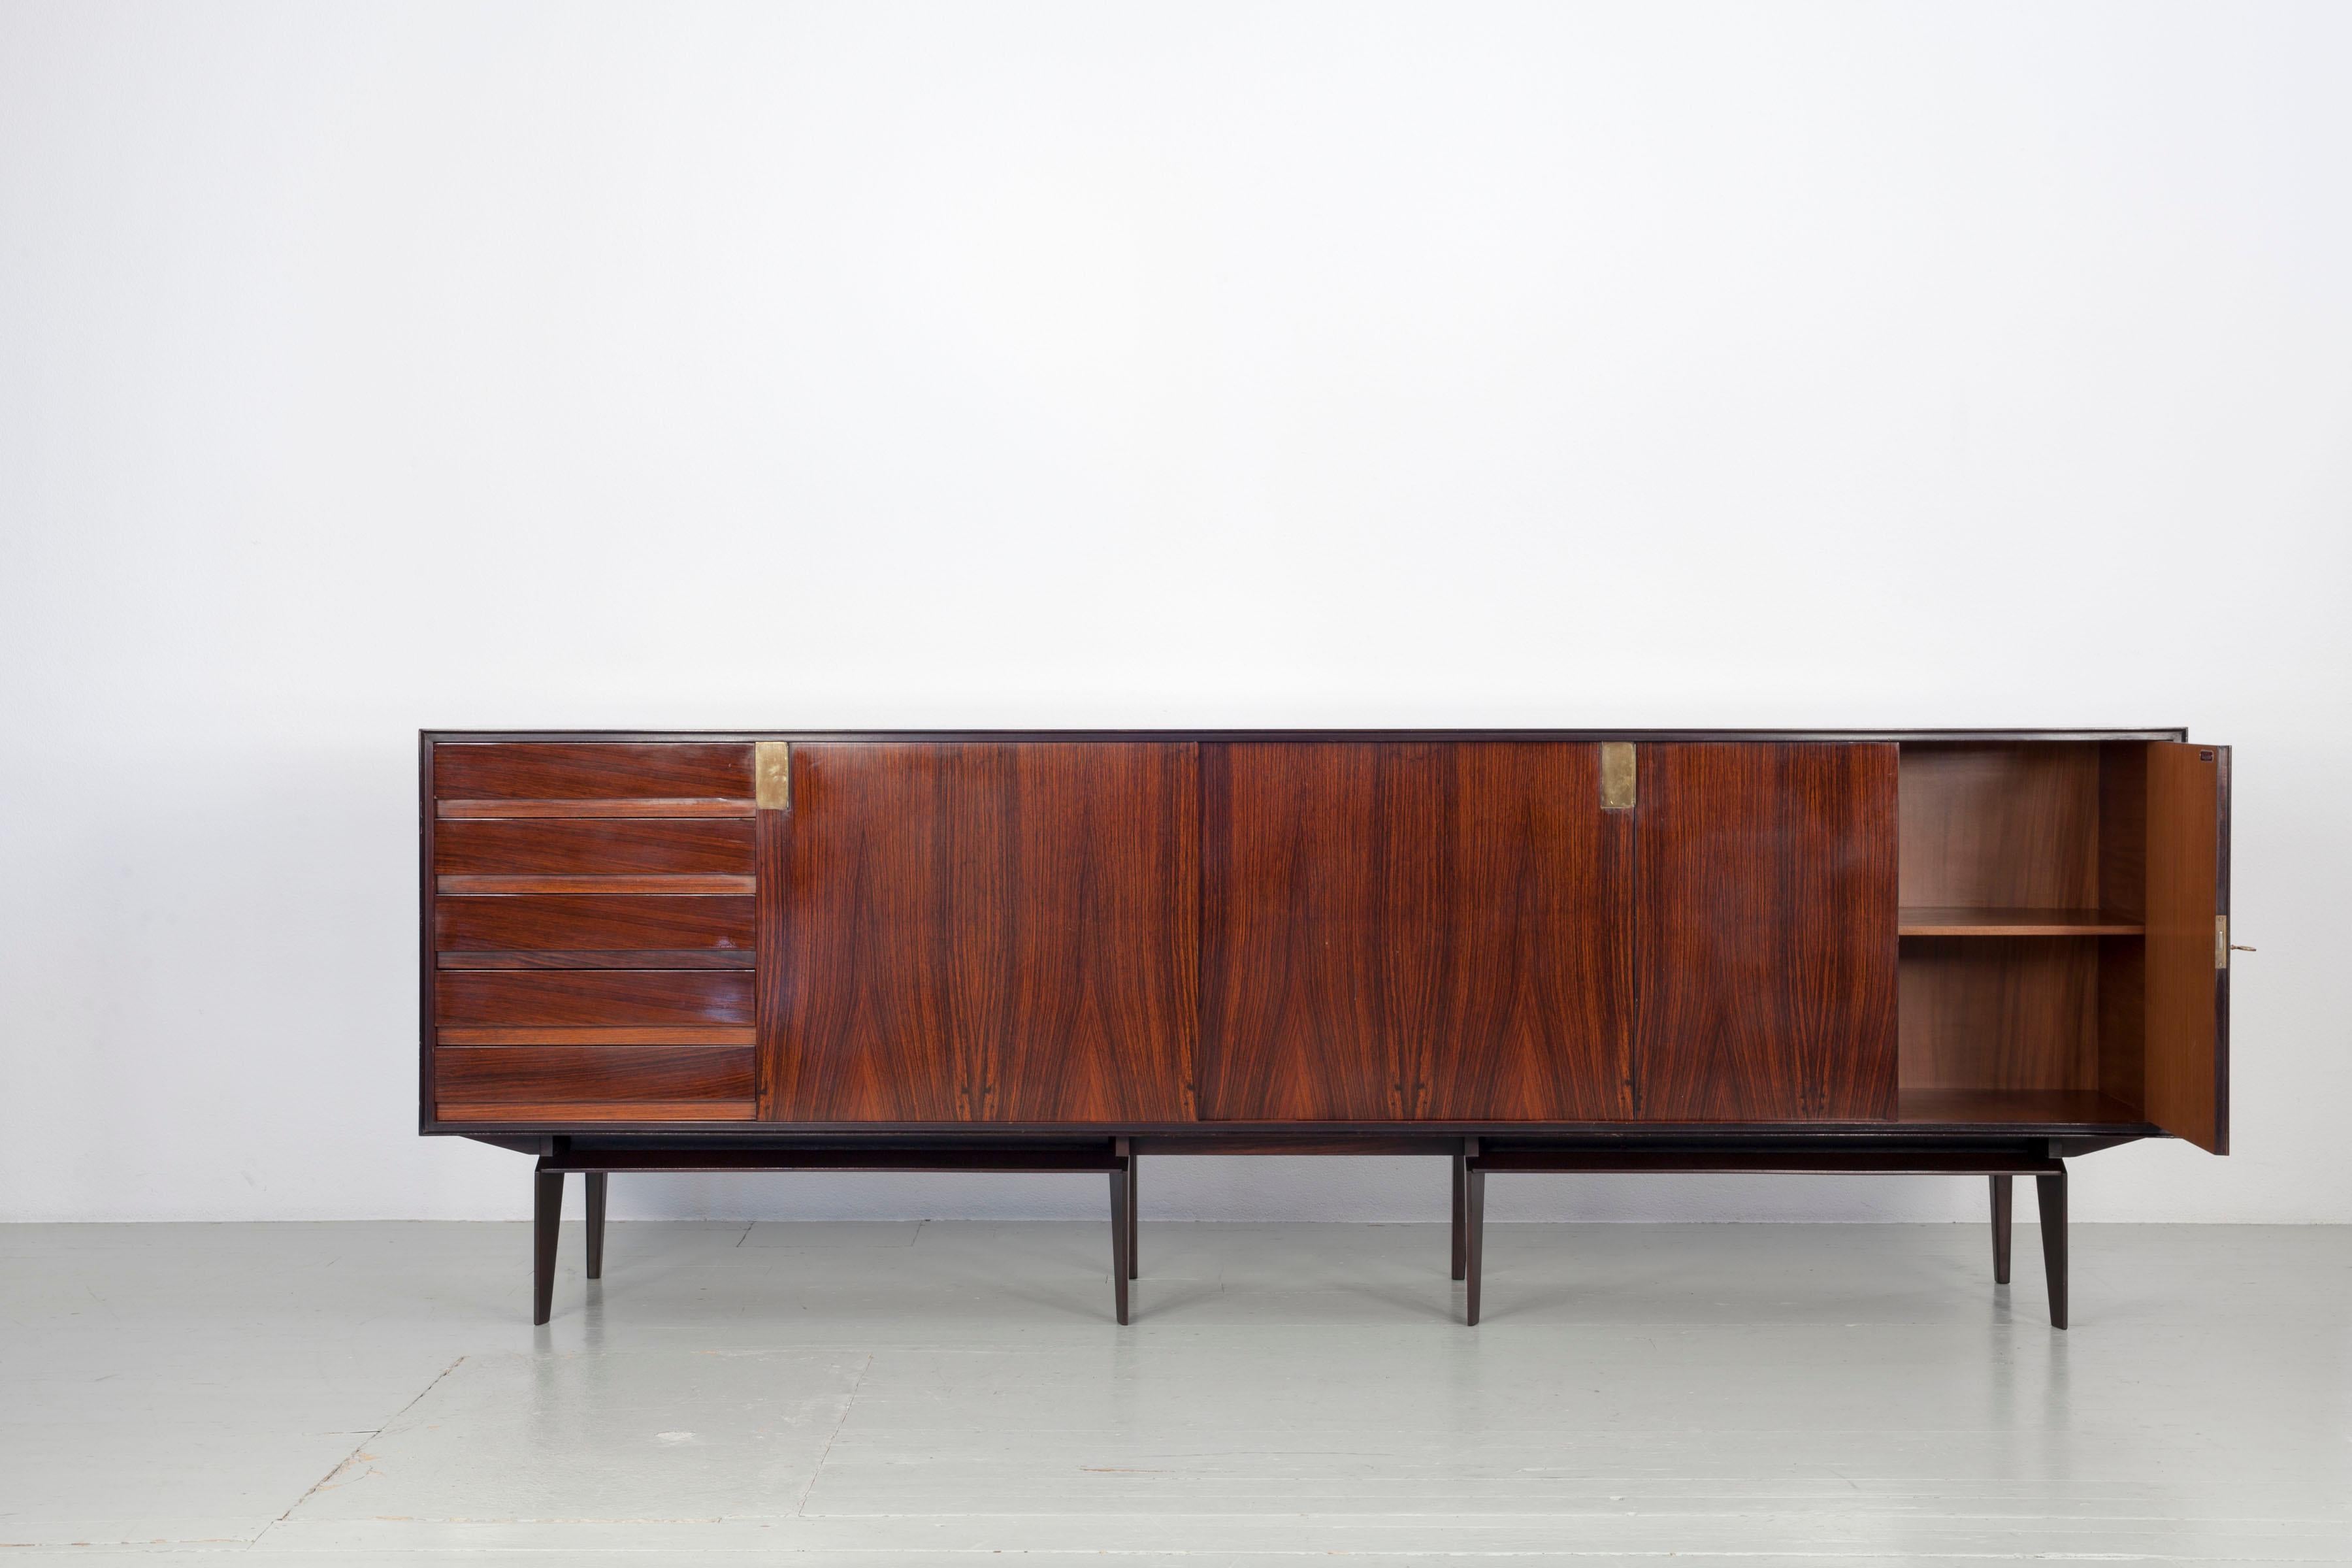 Elegant and timeless mid-century sideboard designed by Edmondo Palutari for Vittorio Dassi in the 1950s. It has solid and veneered rosewood structure with brass handles on sliding doors and carved wooden handles on drawers. The swing doors have an